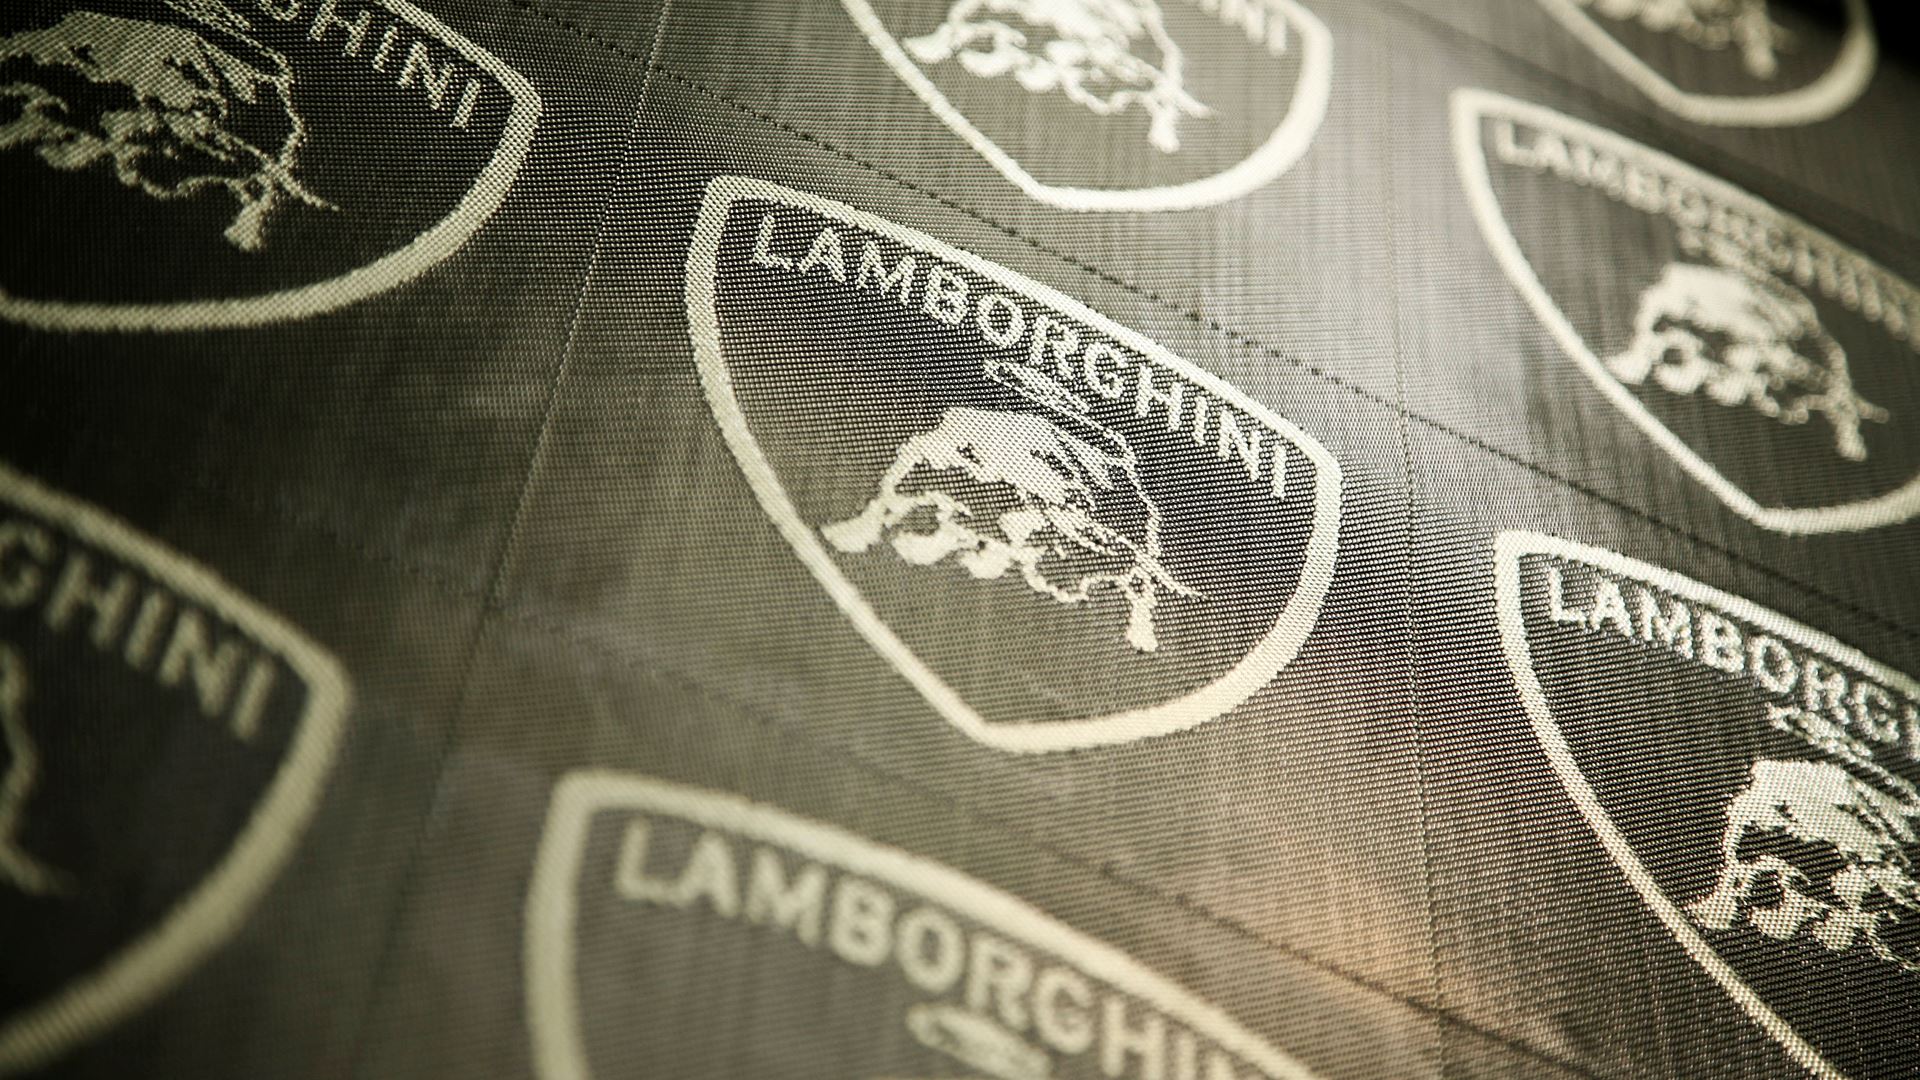 Automobili Lamborghini and composite materials. More than 35 years of history told in 12 chapters - Image 1